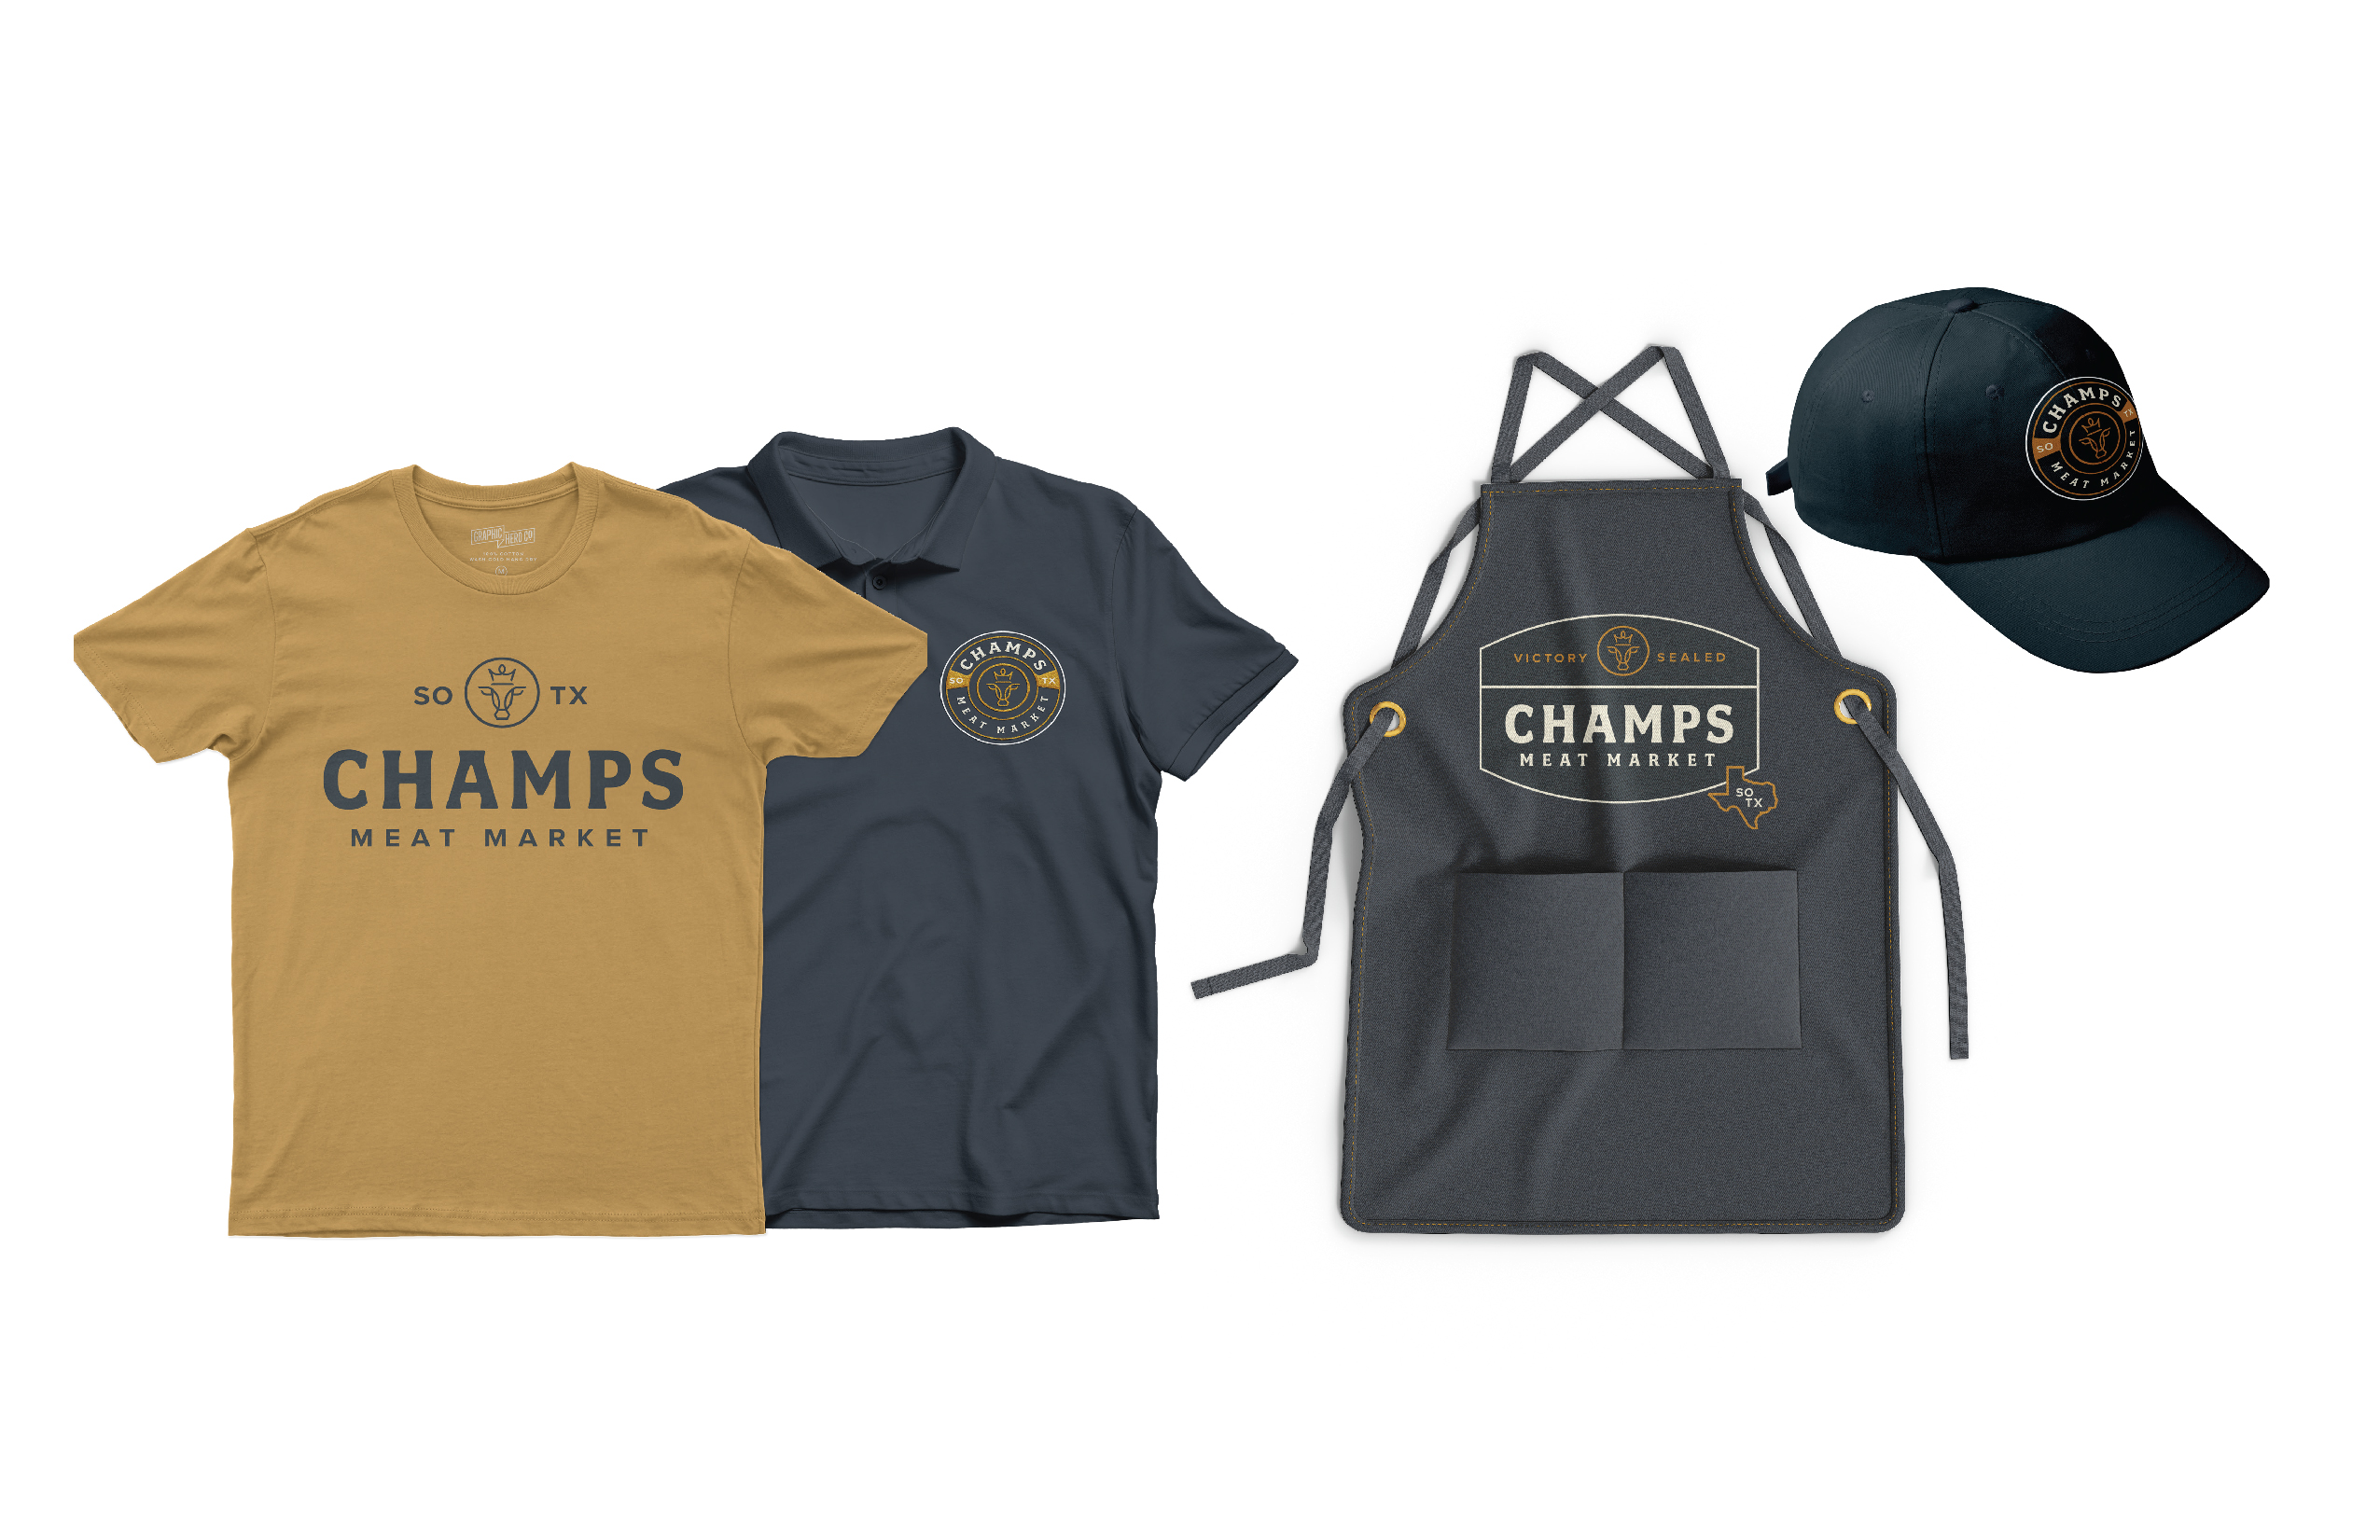 Showing Champs t-shirts and an apron with the Champs logo.